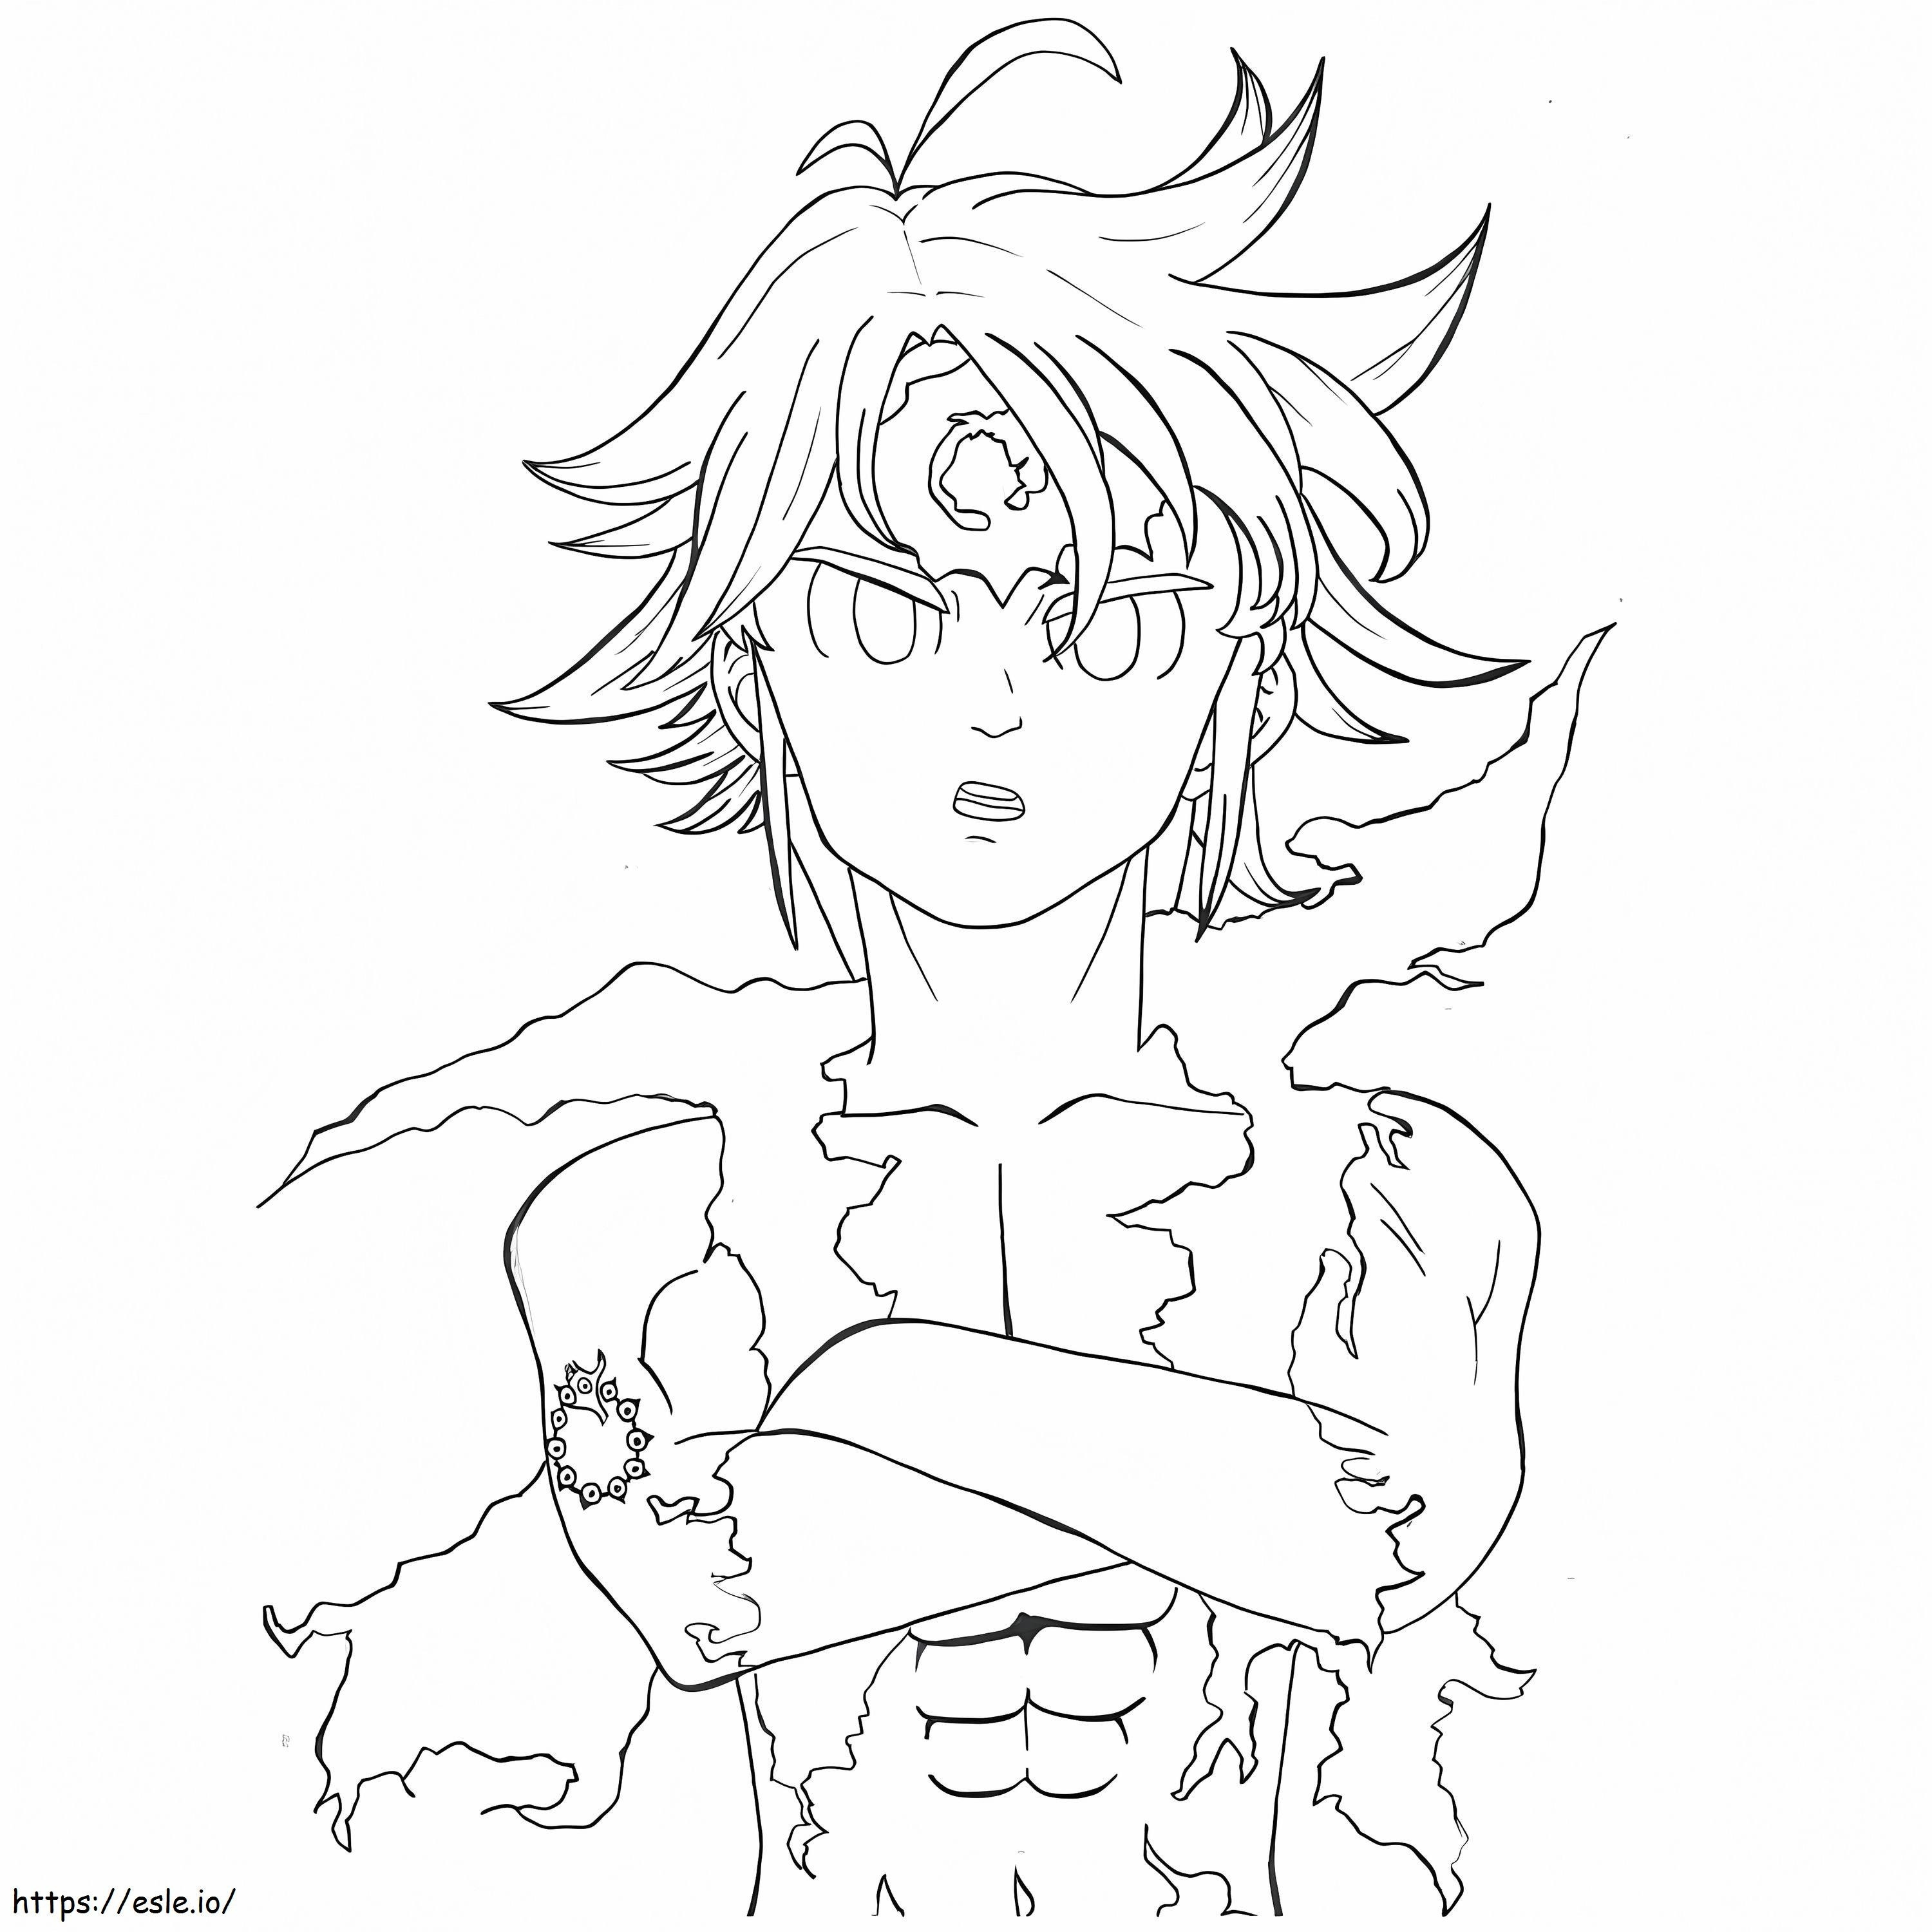 Disgusted Meliodas coloring page